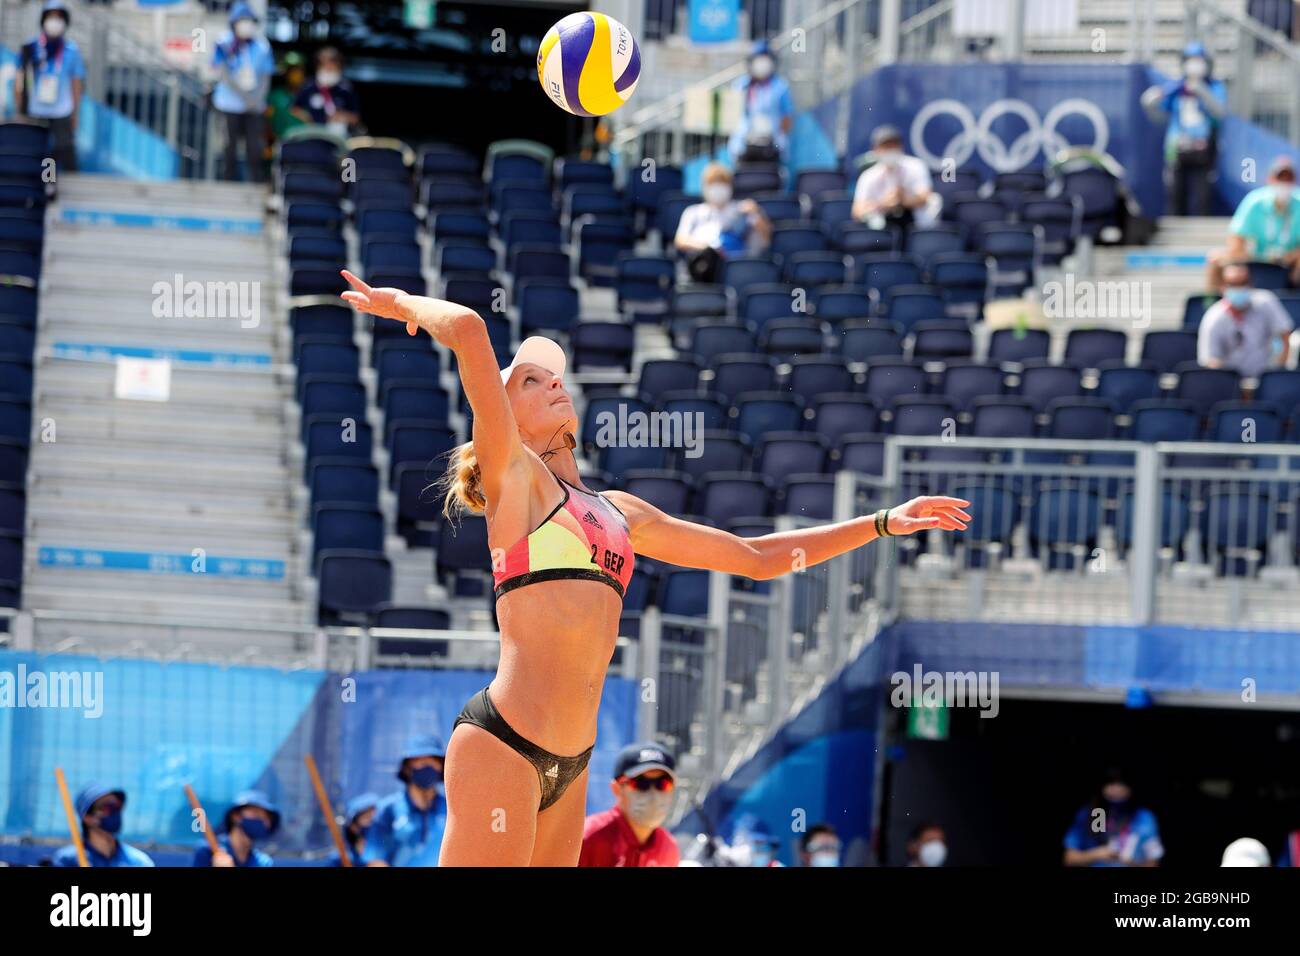 Tokyo, Japan, 3 August, 2021. Margareta Kozuch of Team Germany serves during the Women's Beach Volleyball Quarterfinal match between Germany and USA on Day 11 of the Tokyo 2020 Olympic Games. Credit: Pete Dovgan/Speed Media/Alamy Live News Stock Photo